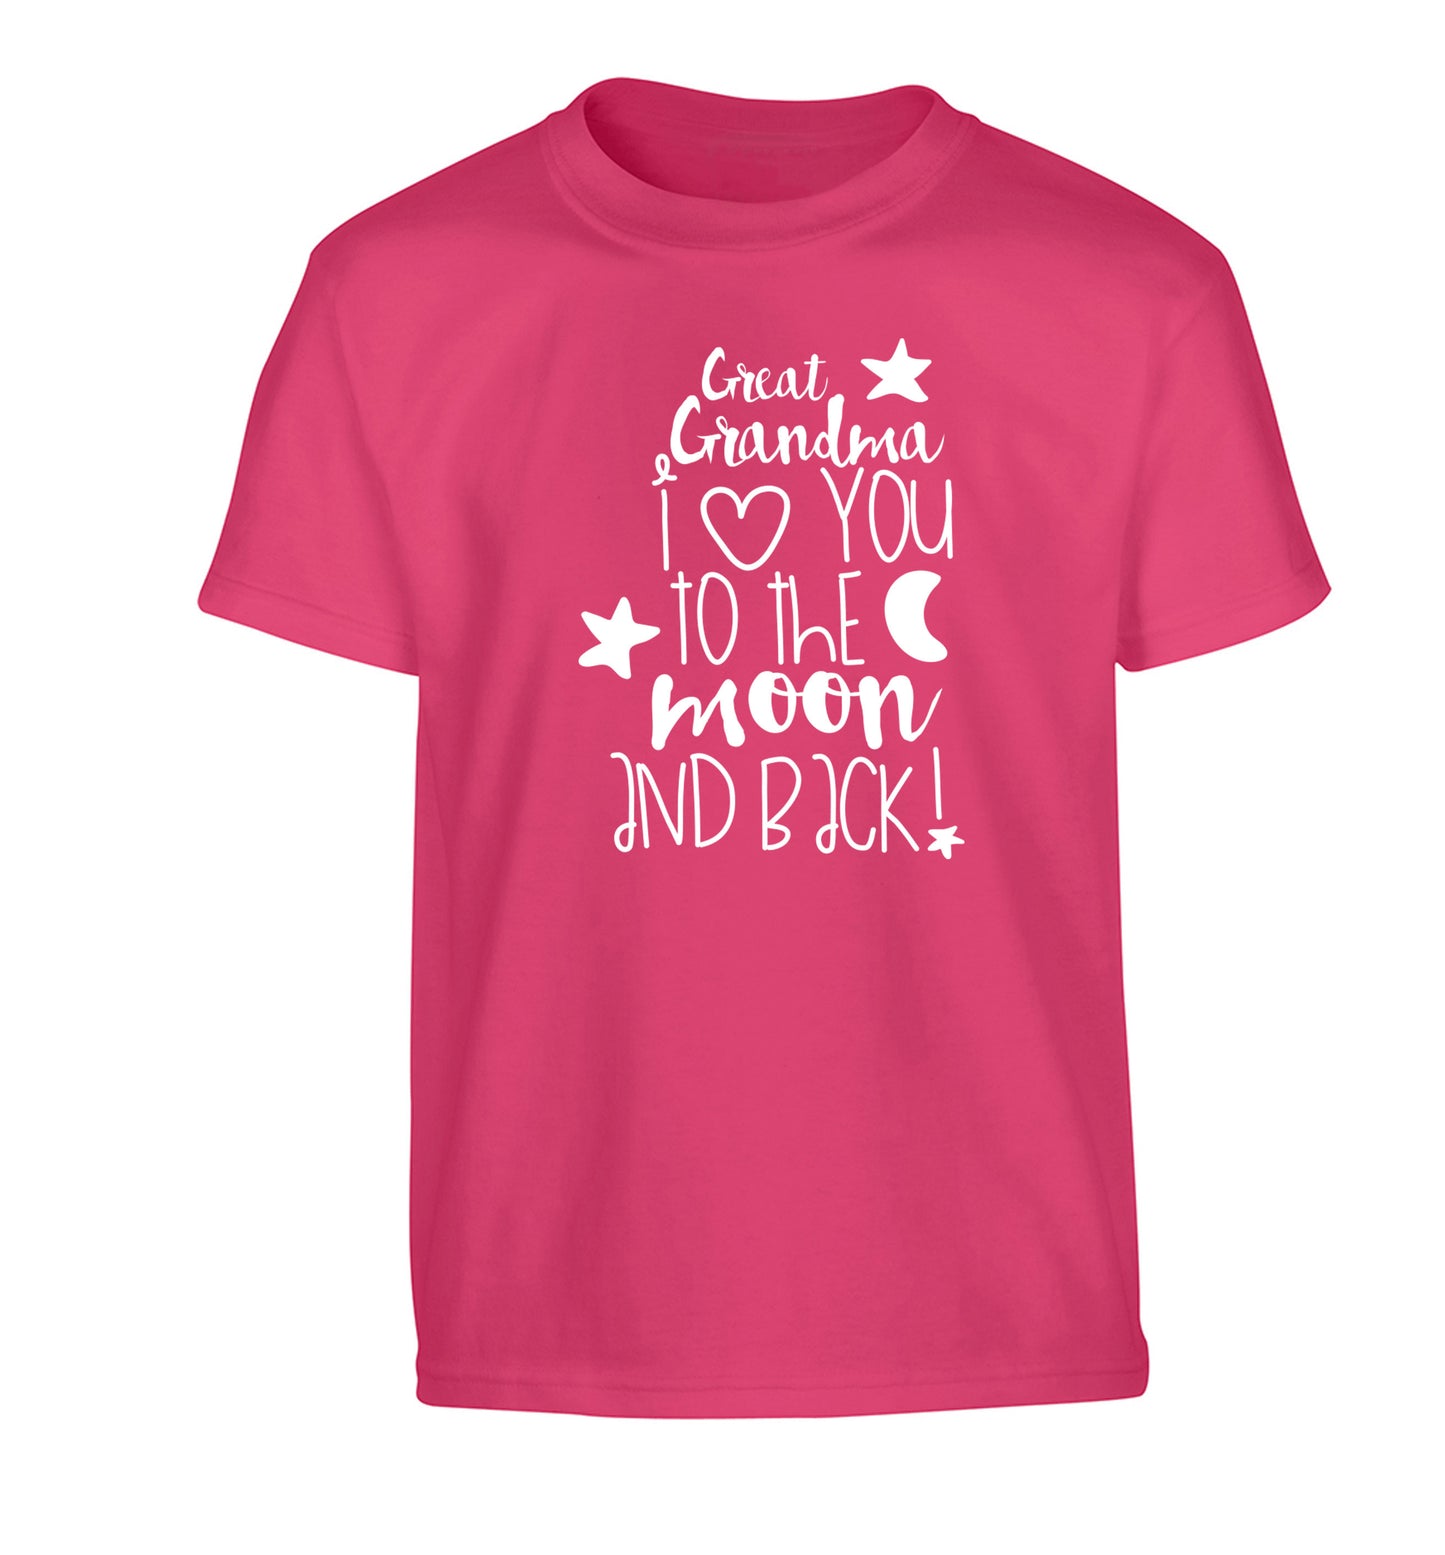 Great Grandma I love you to the moon and back Children's pink Tshirt 12-14 Years